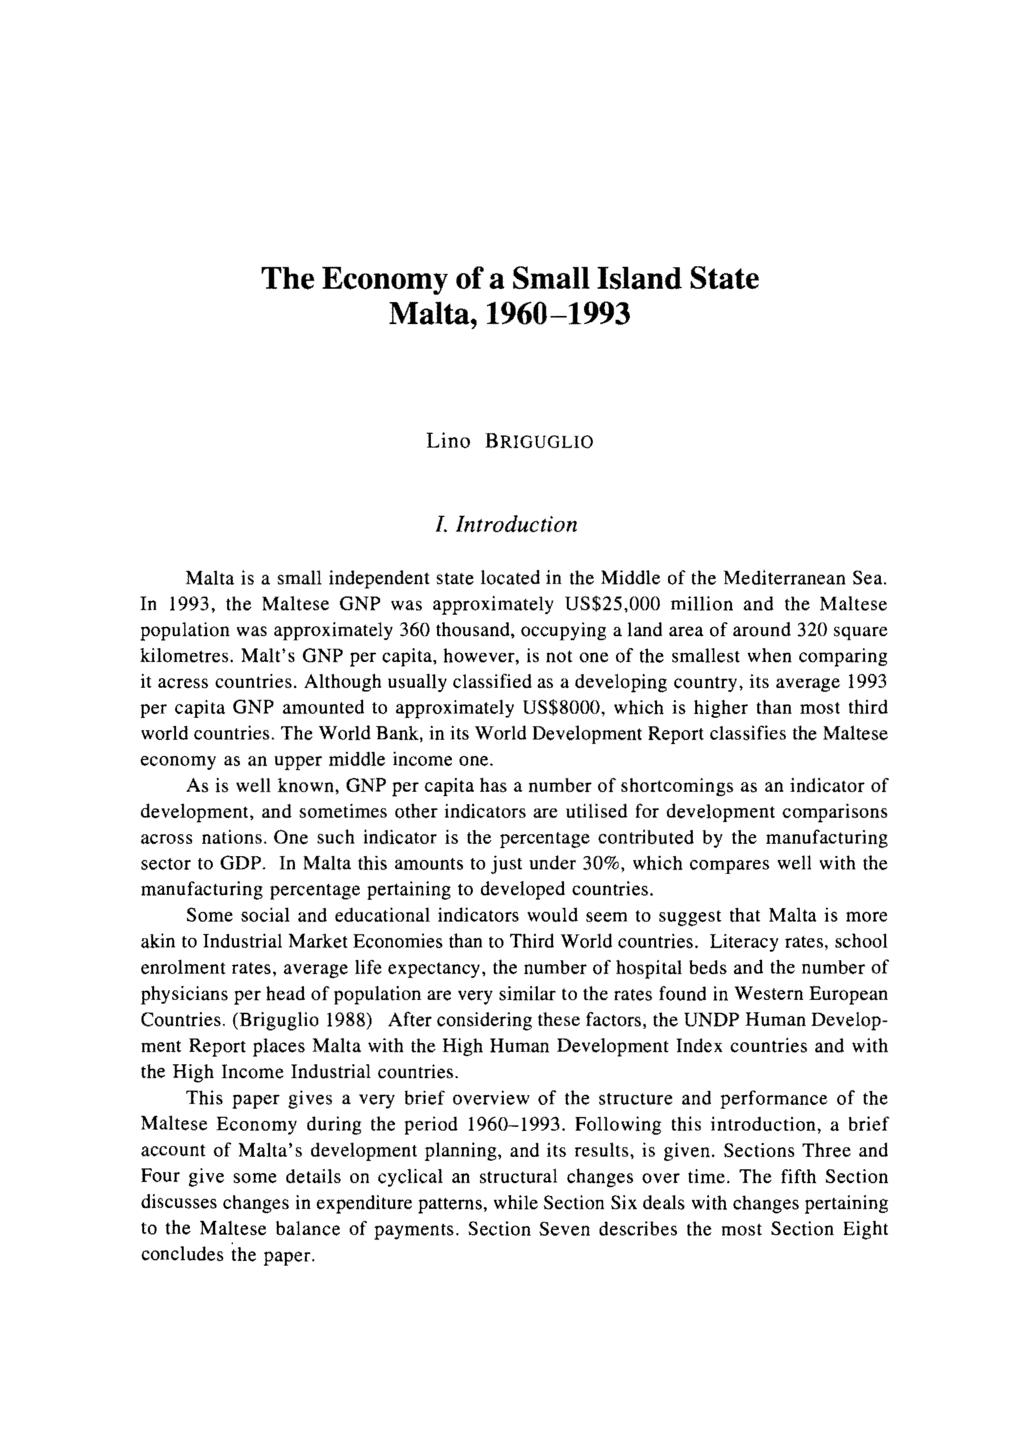 The Economy of a Small Island State Malta, 1960-1993 Lino BRIGUGLIO I. Introduction Malta is a small independent state located in the Middle of the Mediterranean Sea.